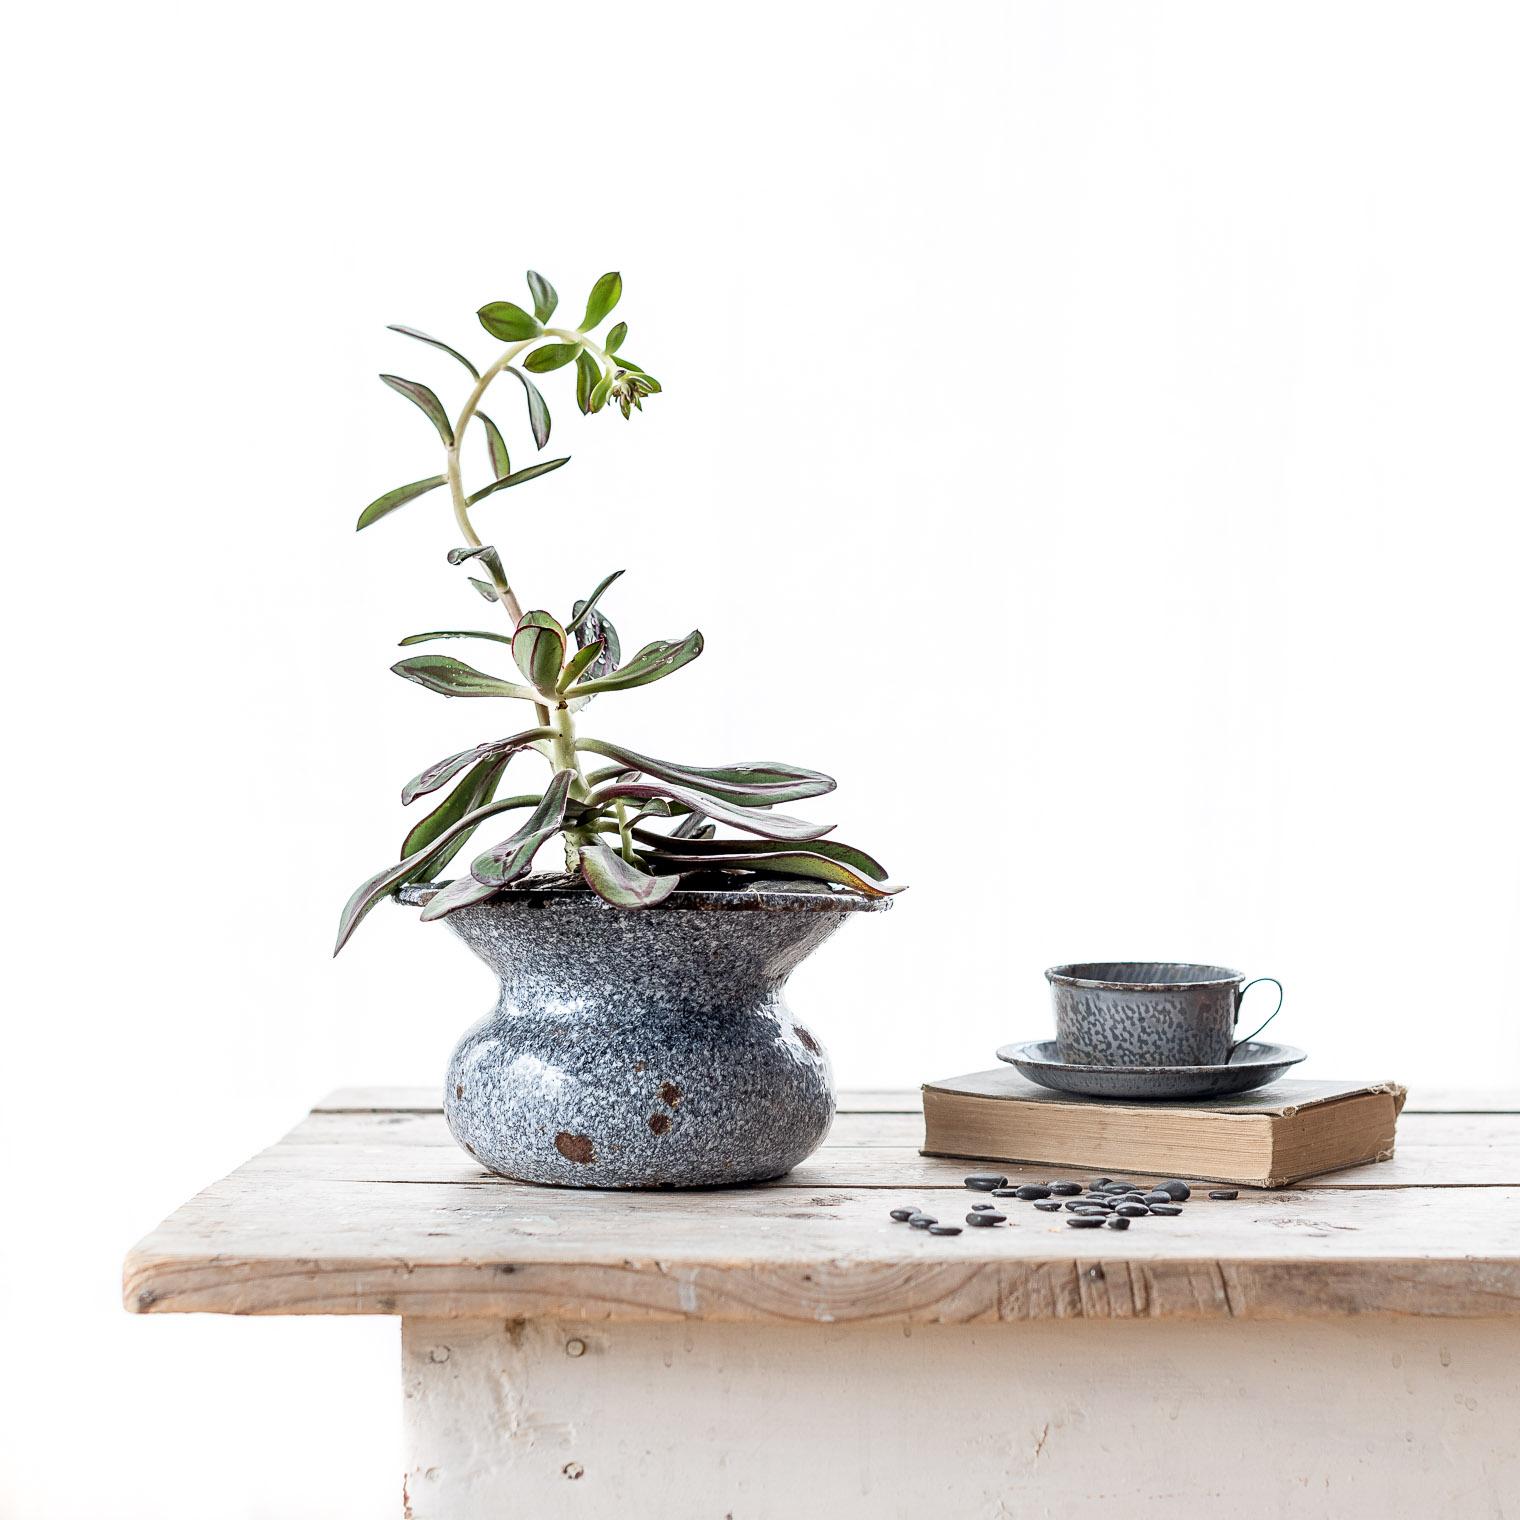 Tips for Overwintering Succulents Indoors, Keeping With the Times